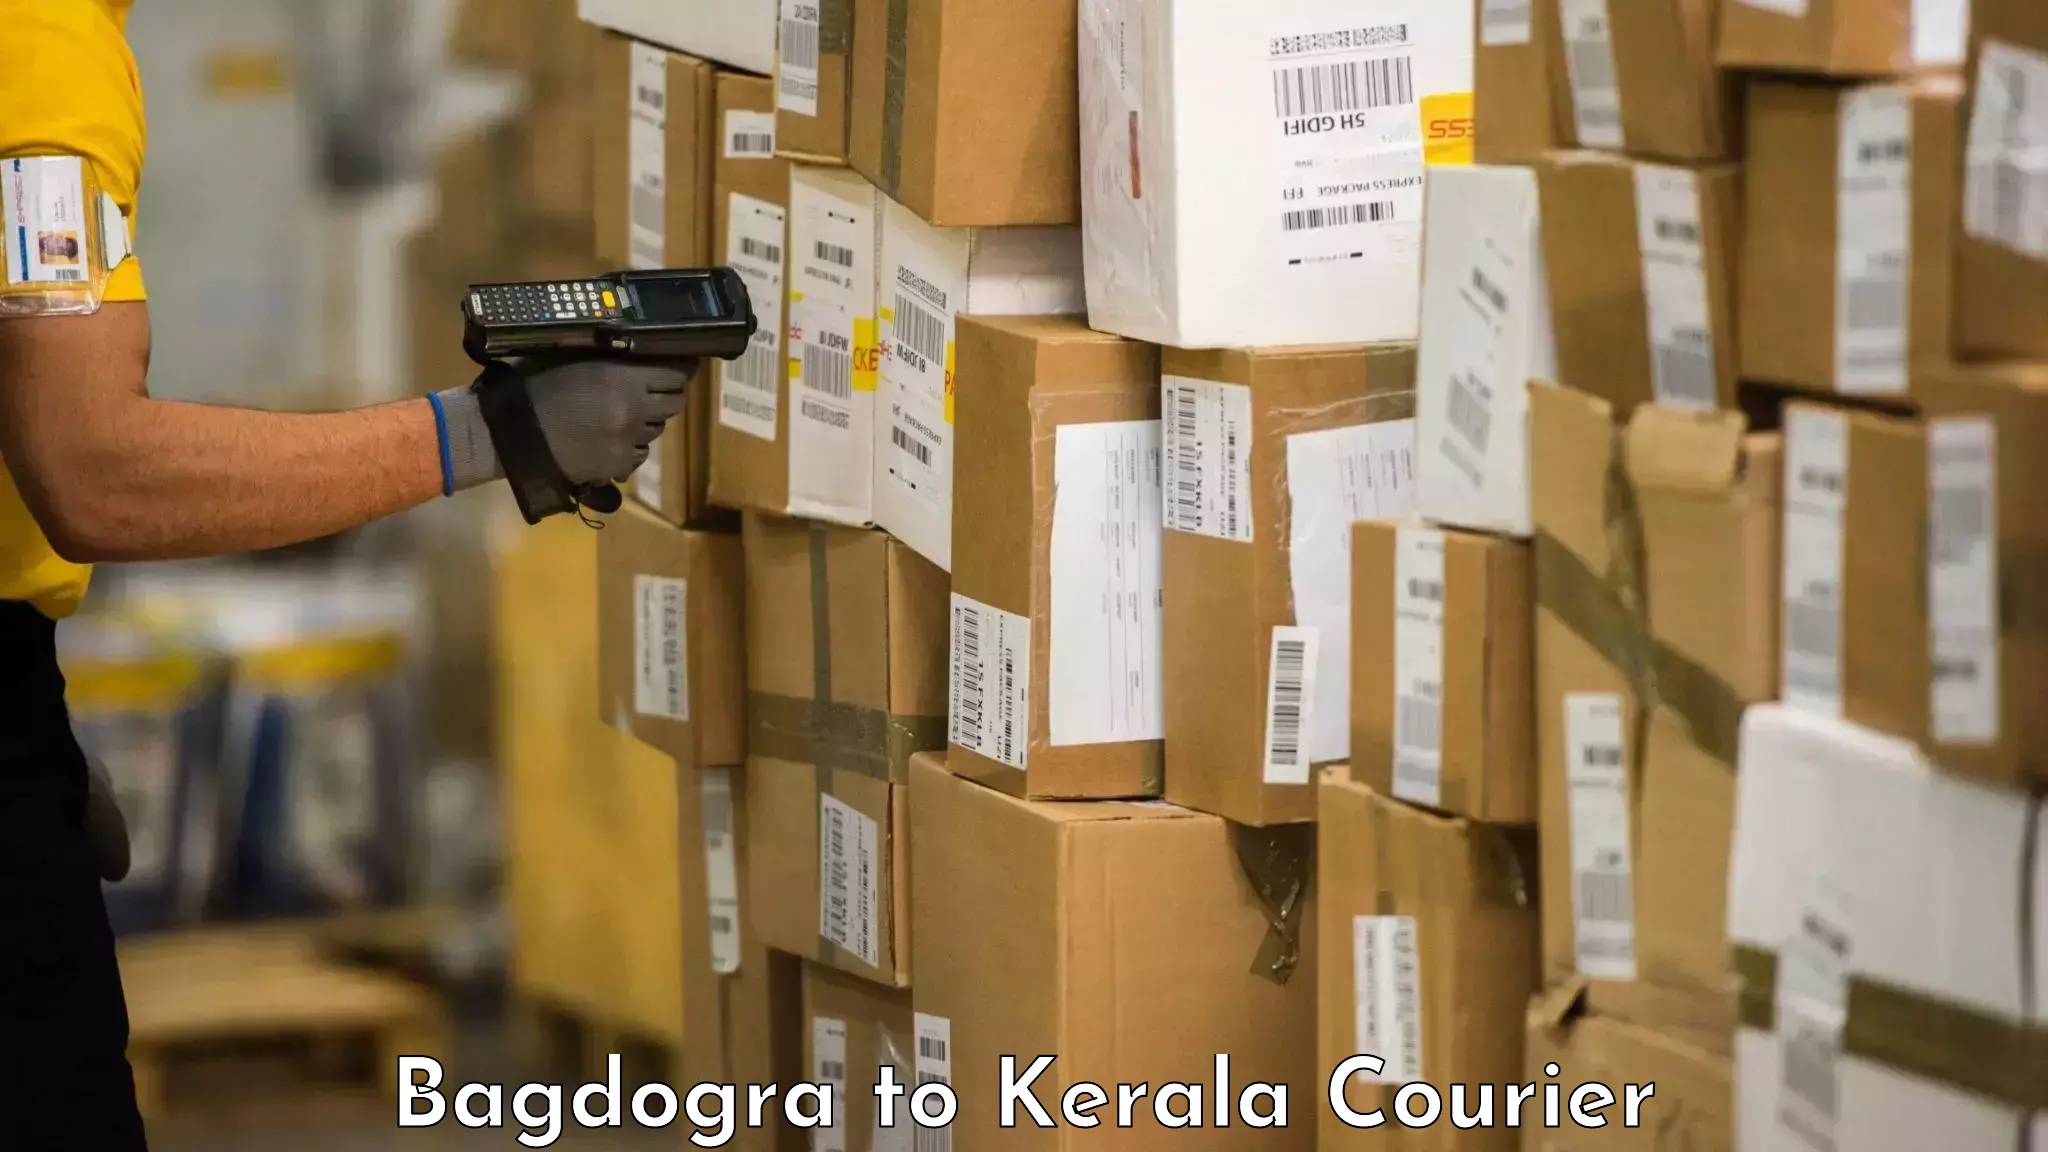 International baggage delivery in Bagdogra to Trivandrum